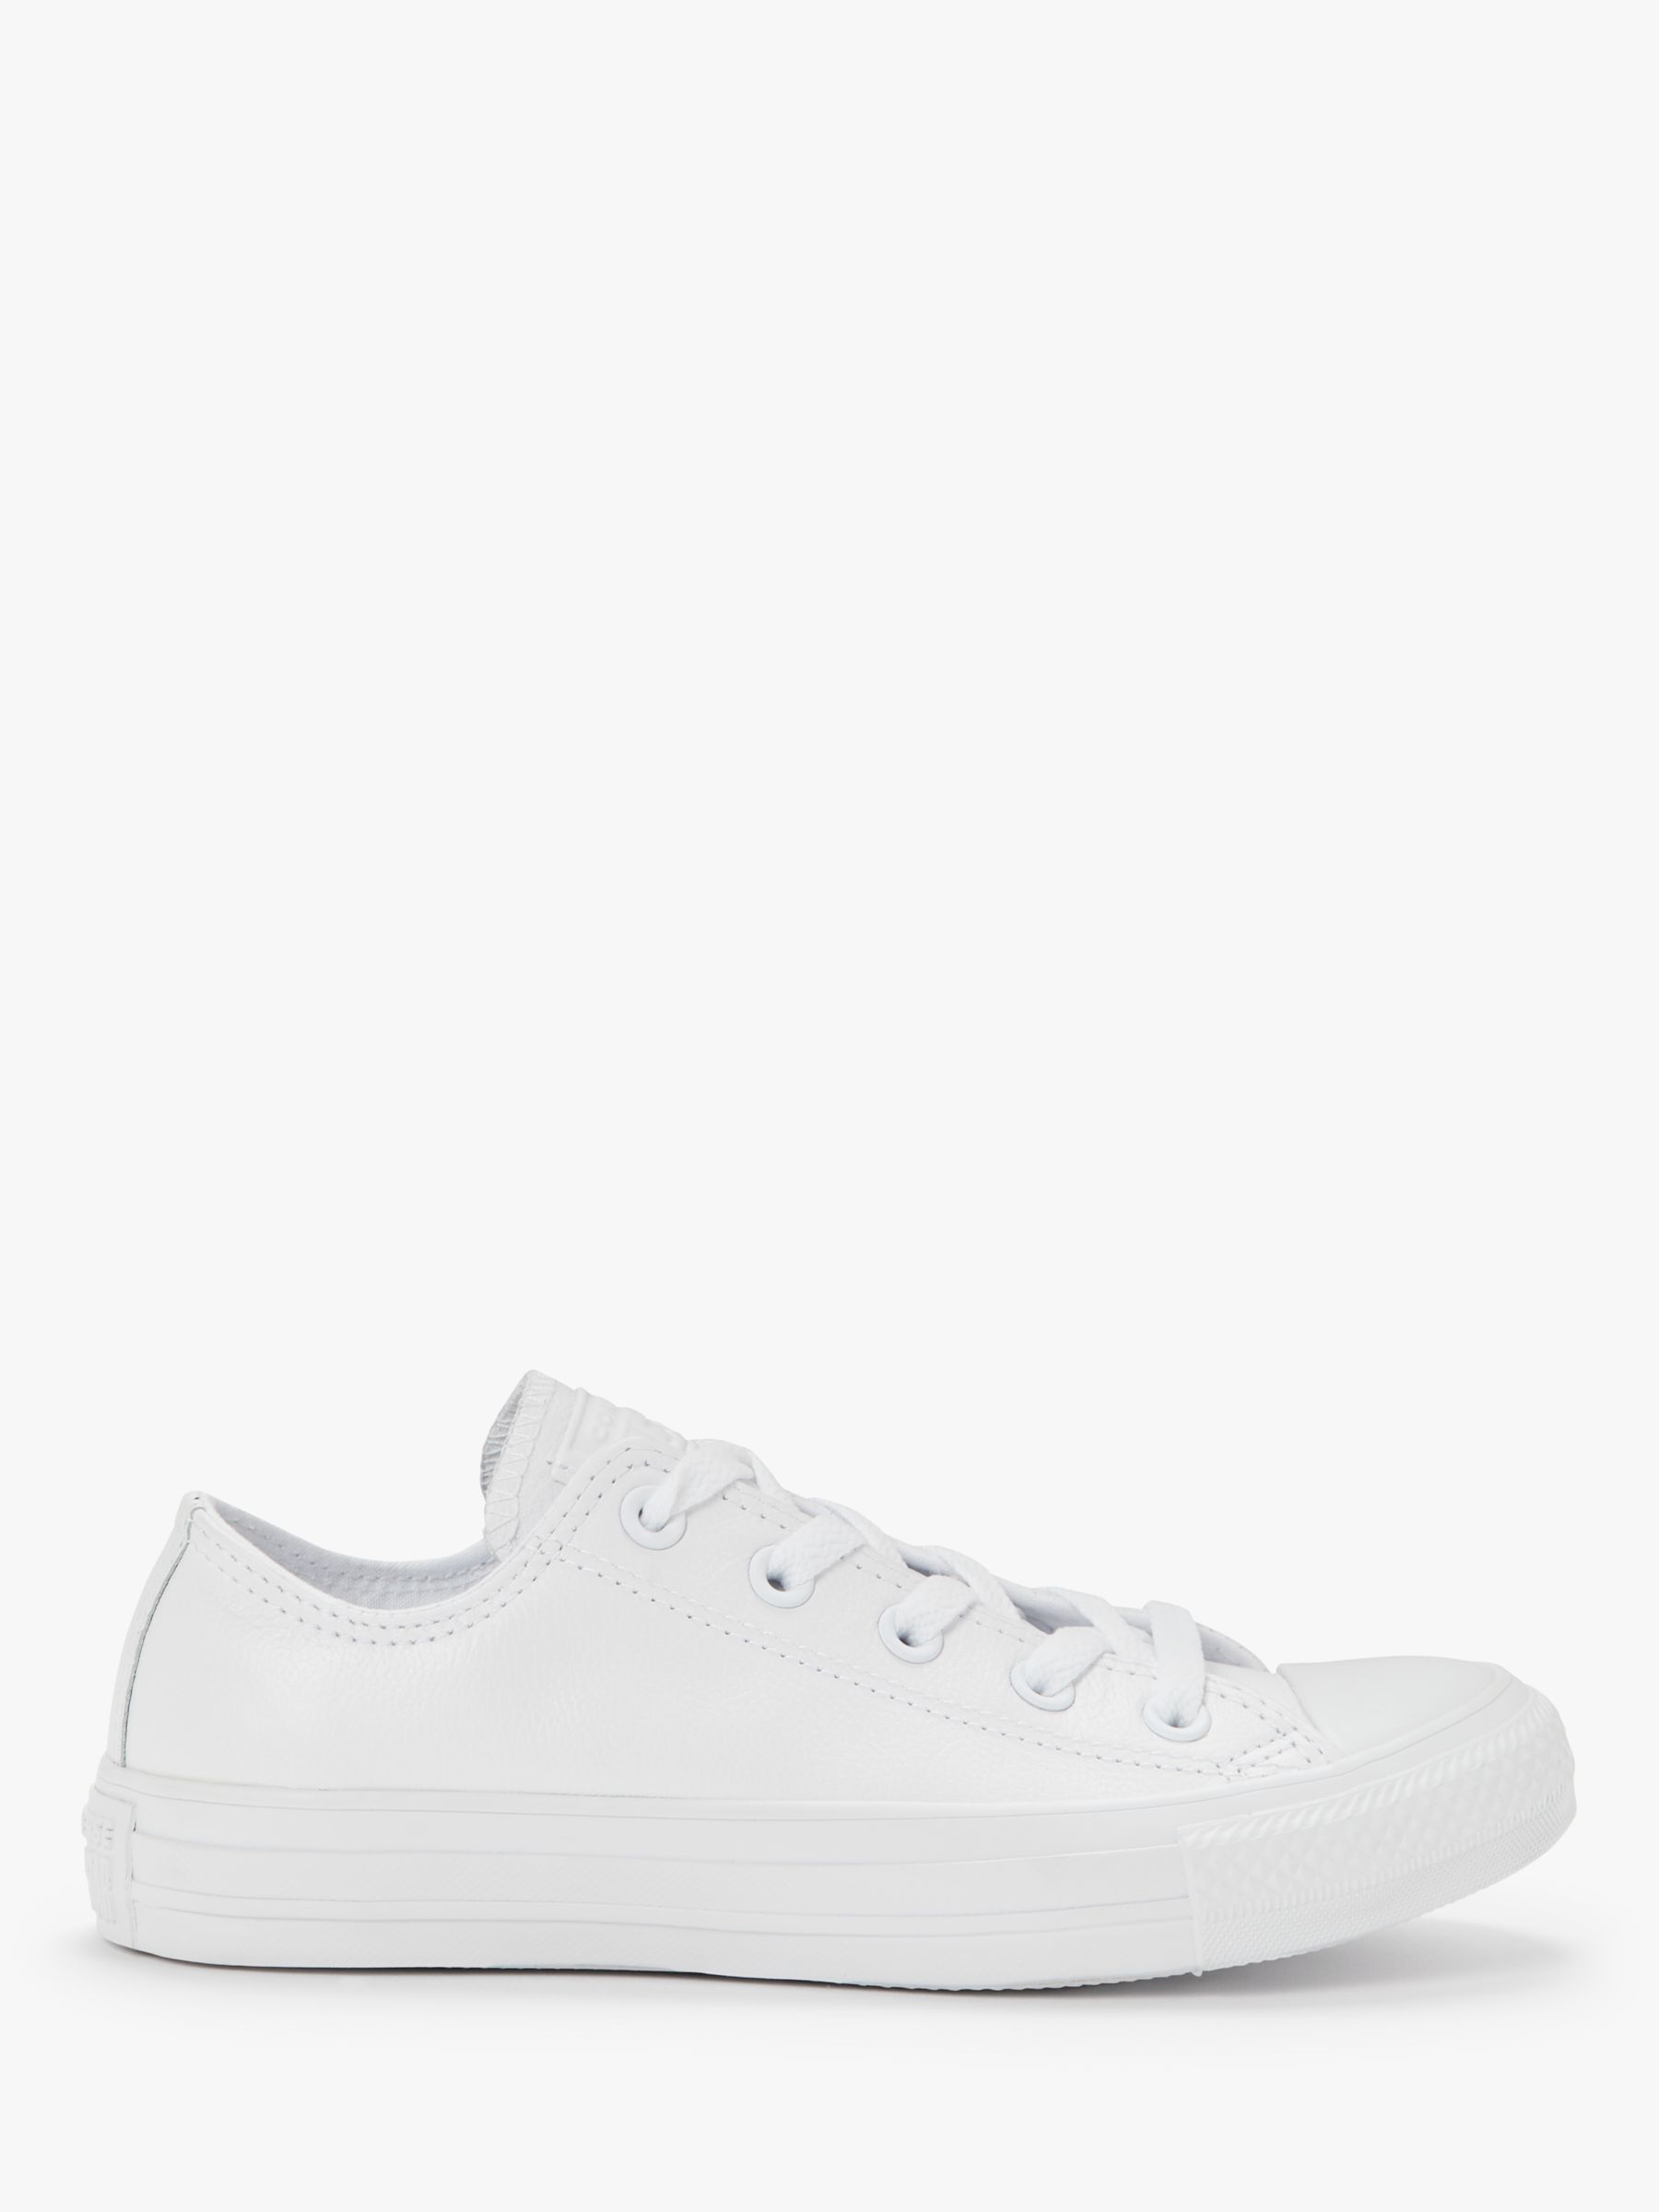 converse all star trainer